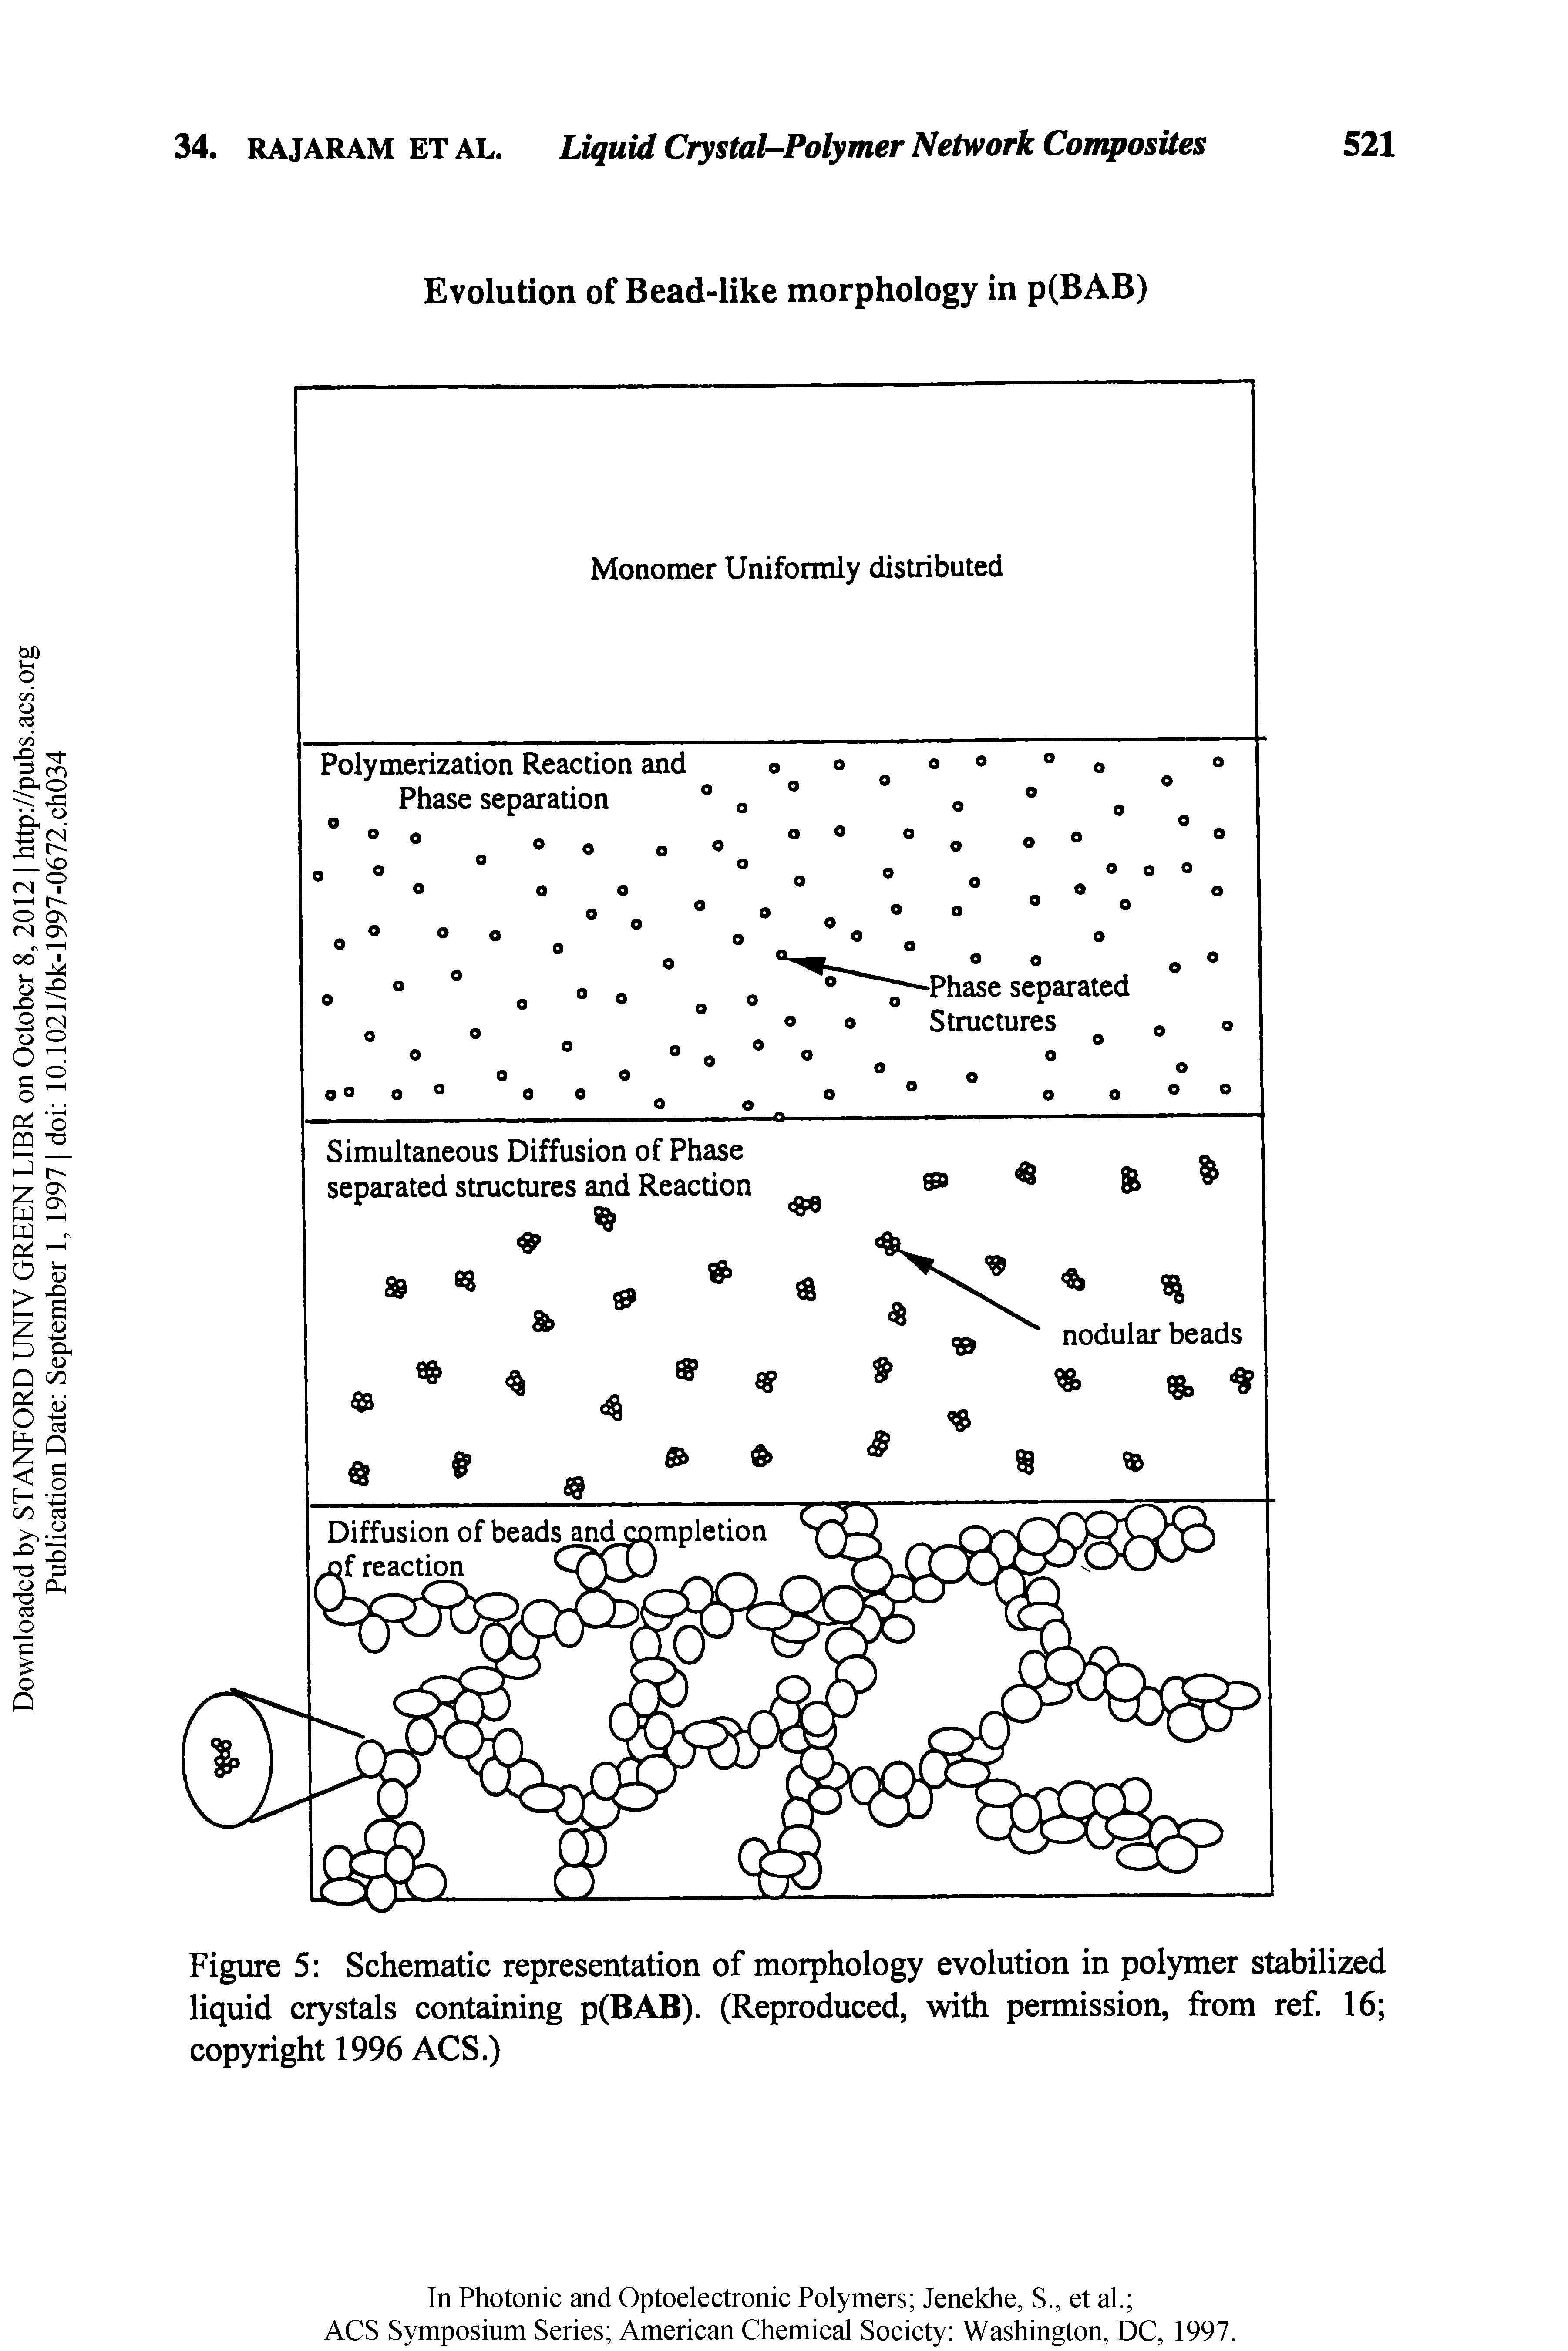 Figure 5 Schematic representation of morphology evolution in polymer stabilized liquid crystals containing p(BAB). (Reproduced, with permission, from ref. 16 copyright 1996 ACS.)...